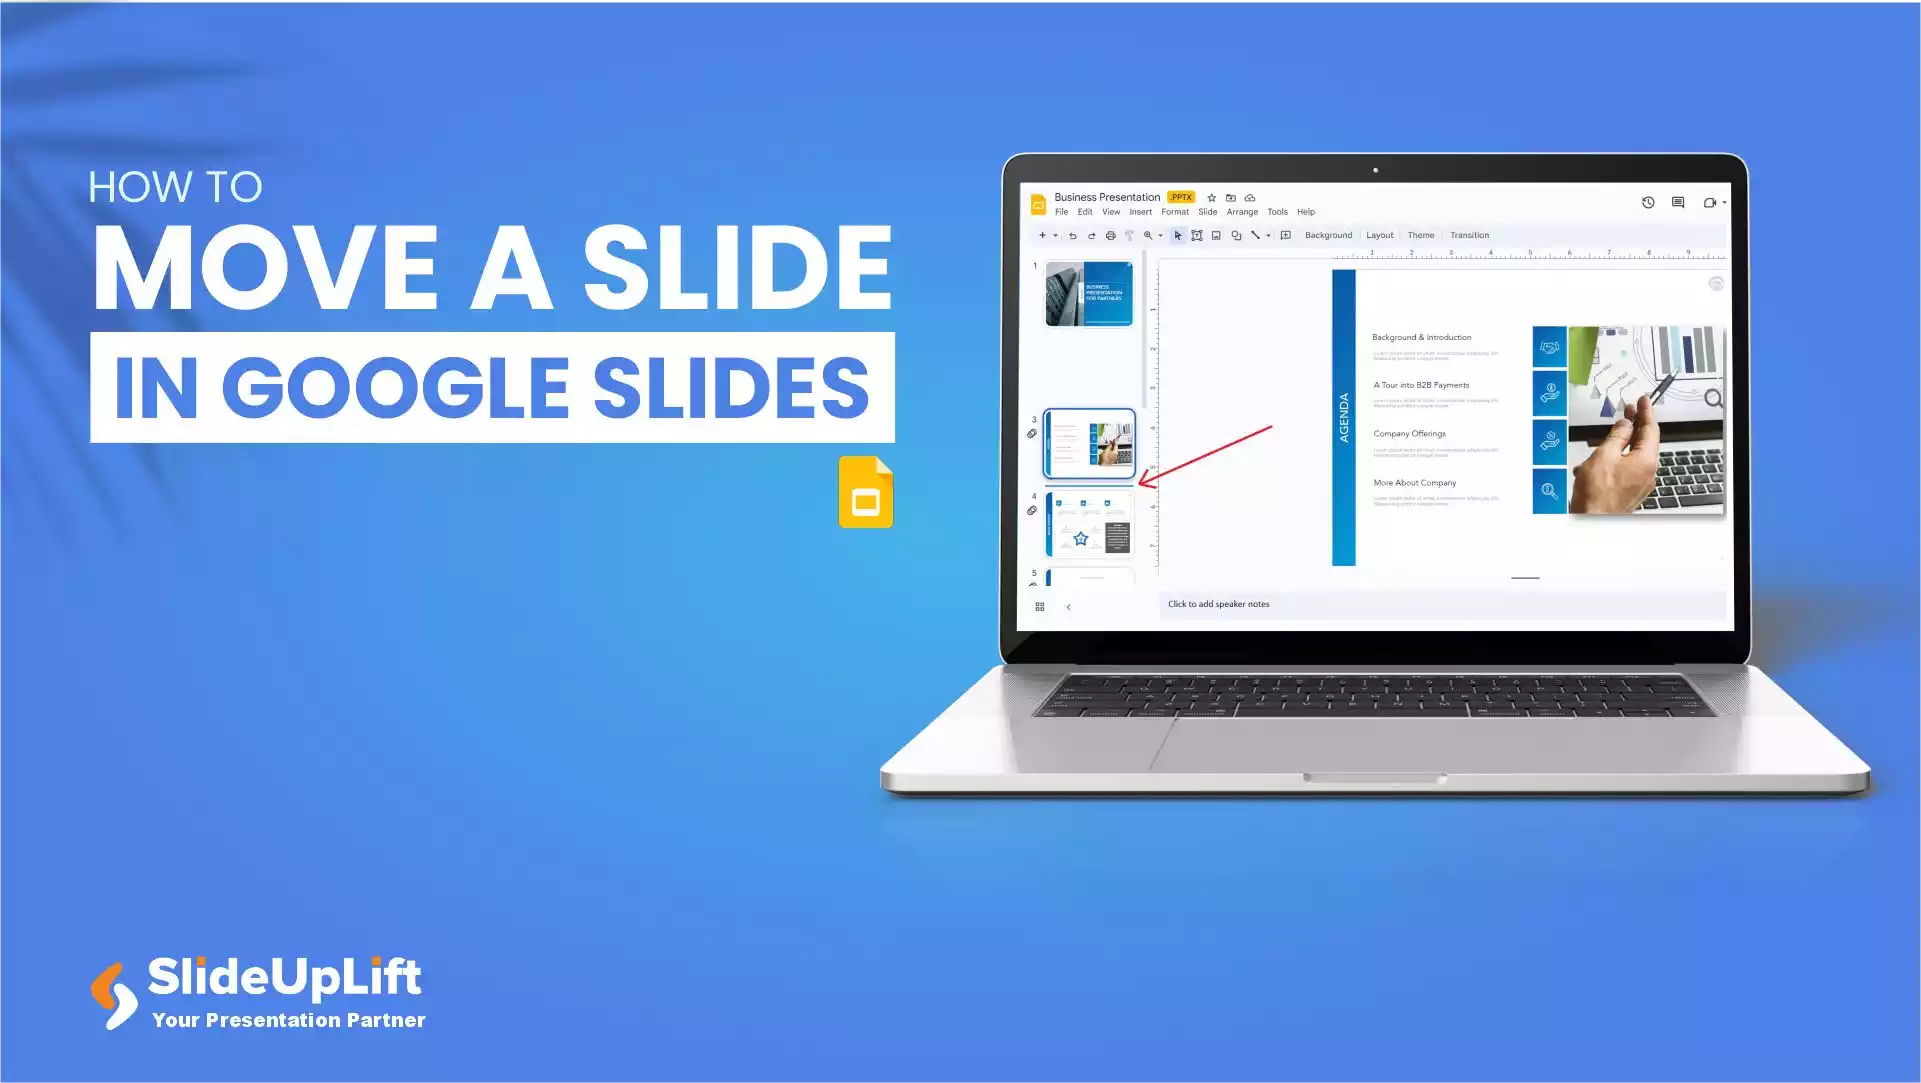 How To Move A Slide In Google Slides?